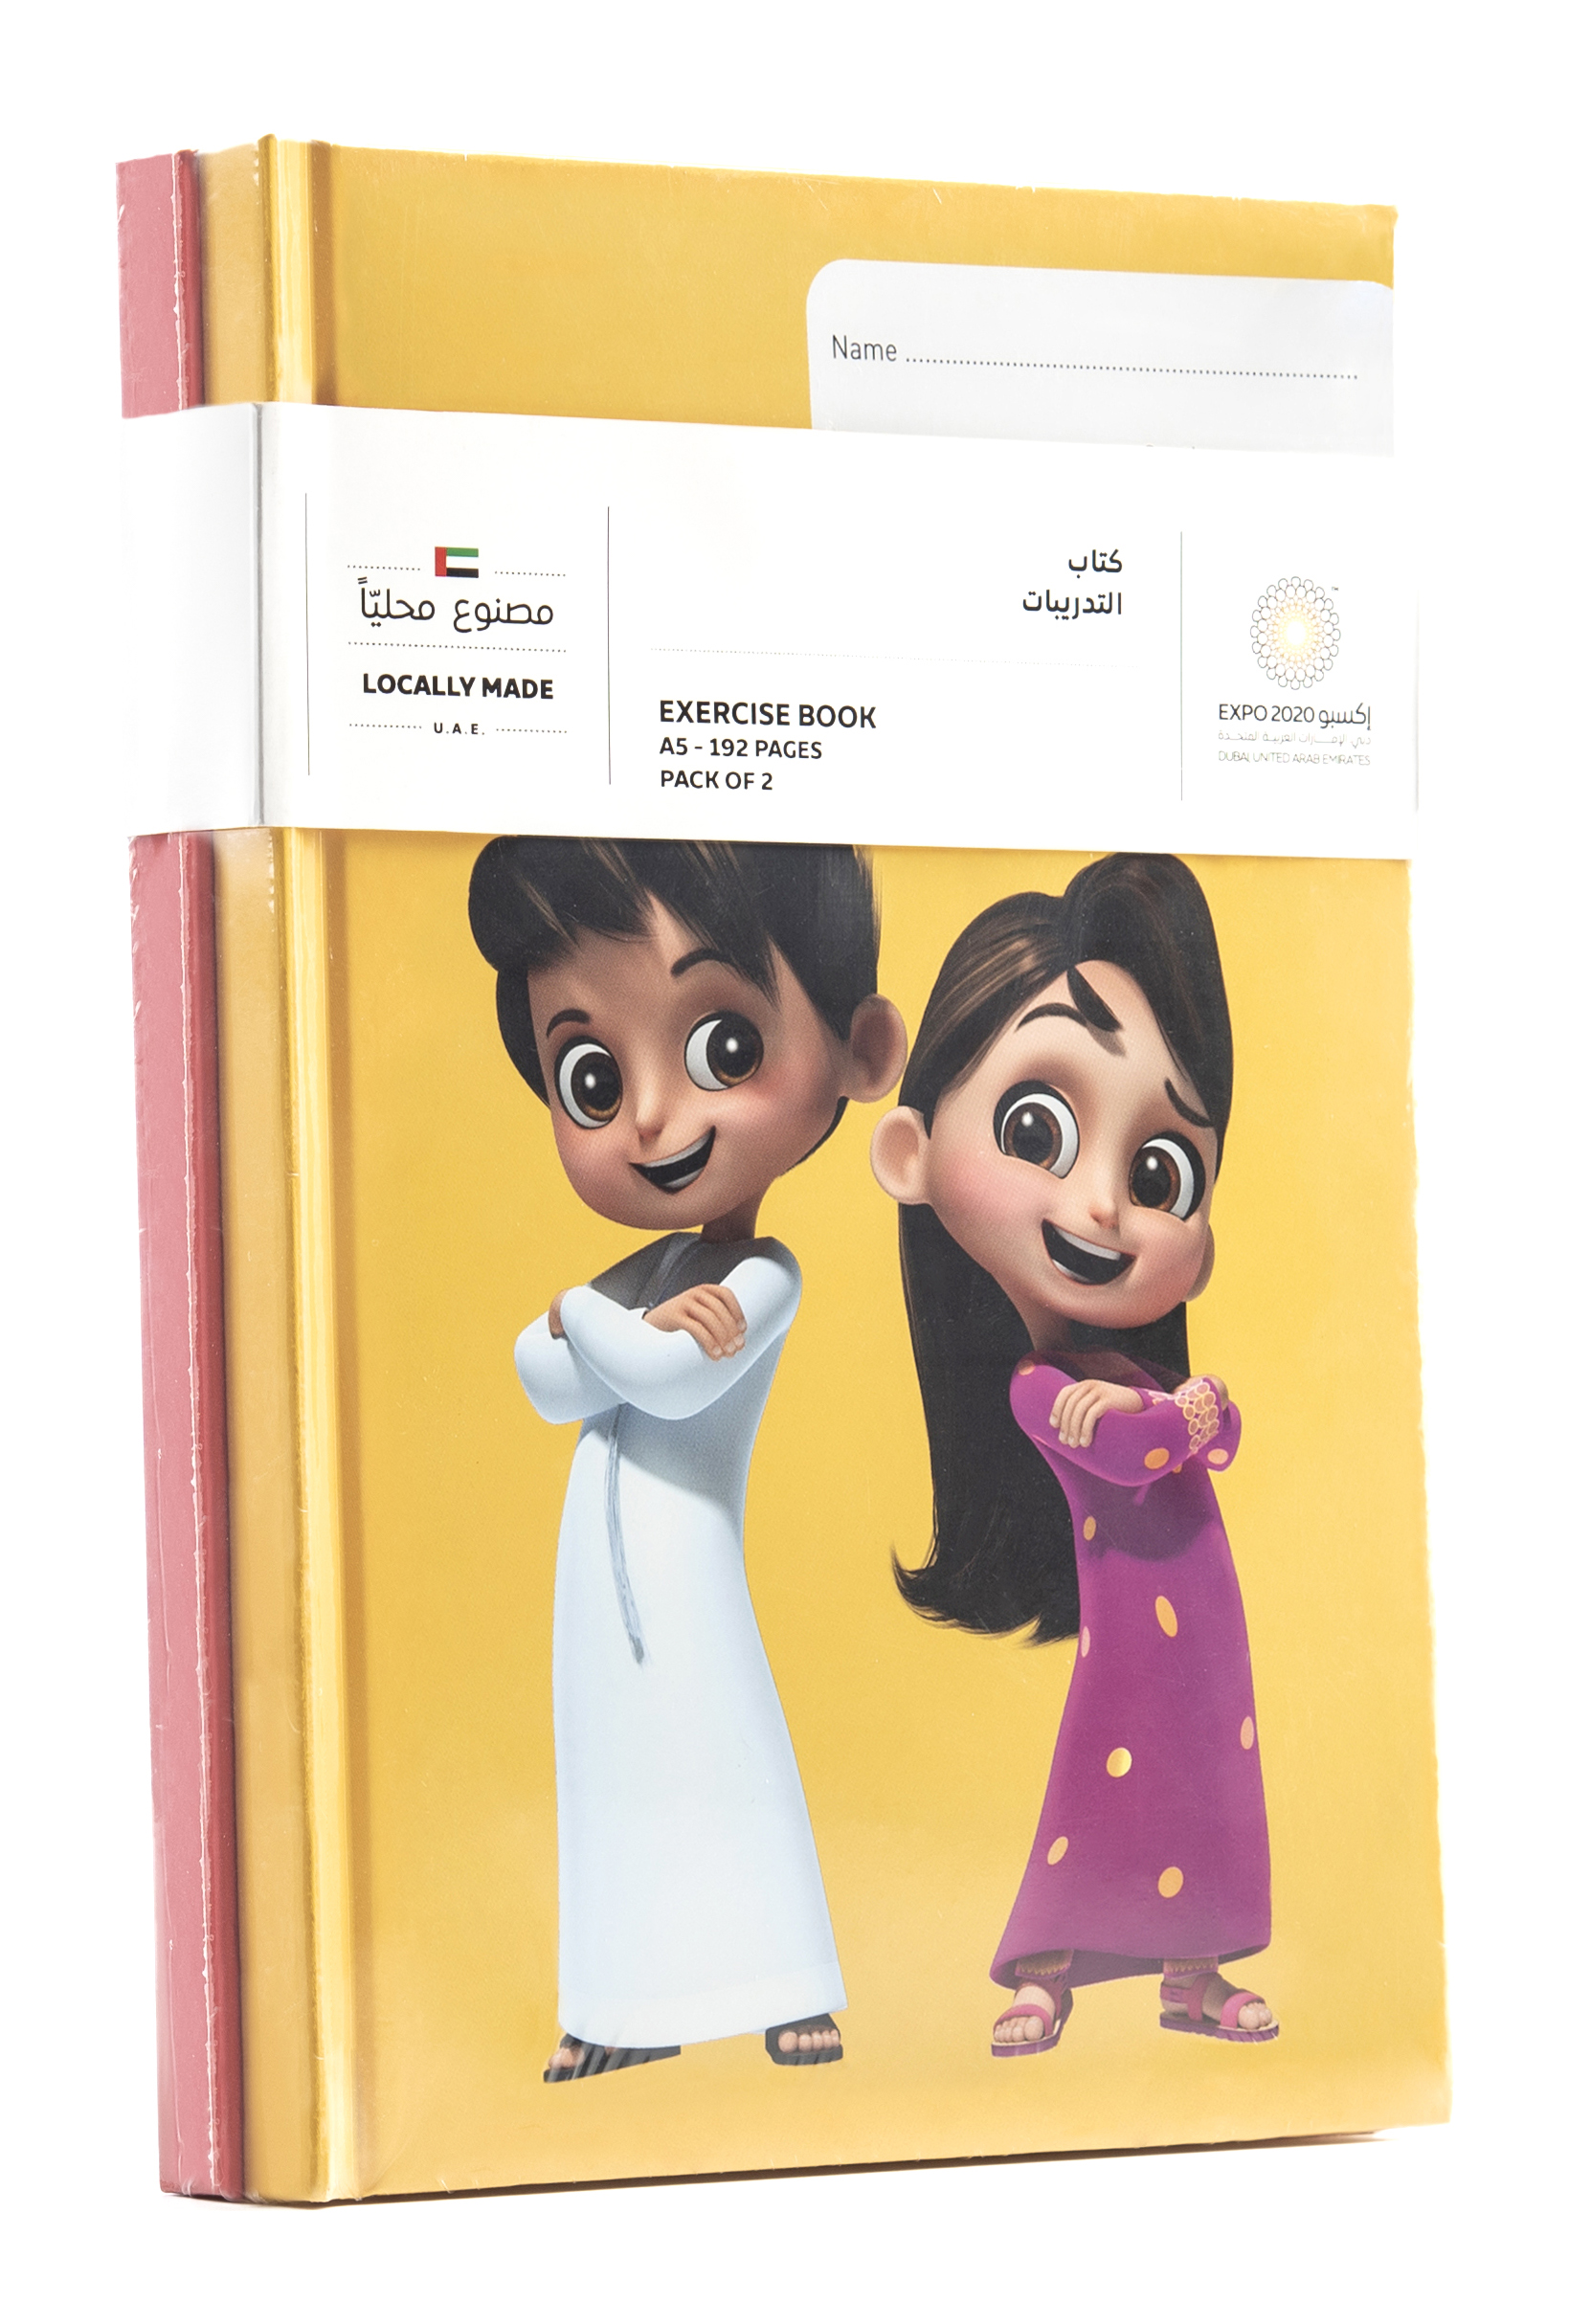 Expo 2020 Dubai Mascots A5 Hardcase Exercise Books Pack of 2 - 192 Pages